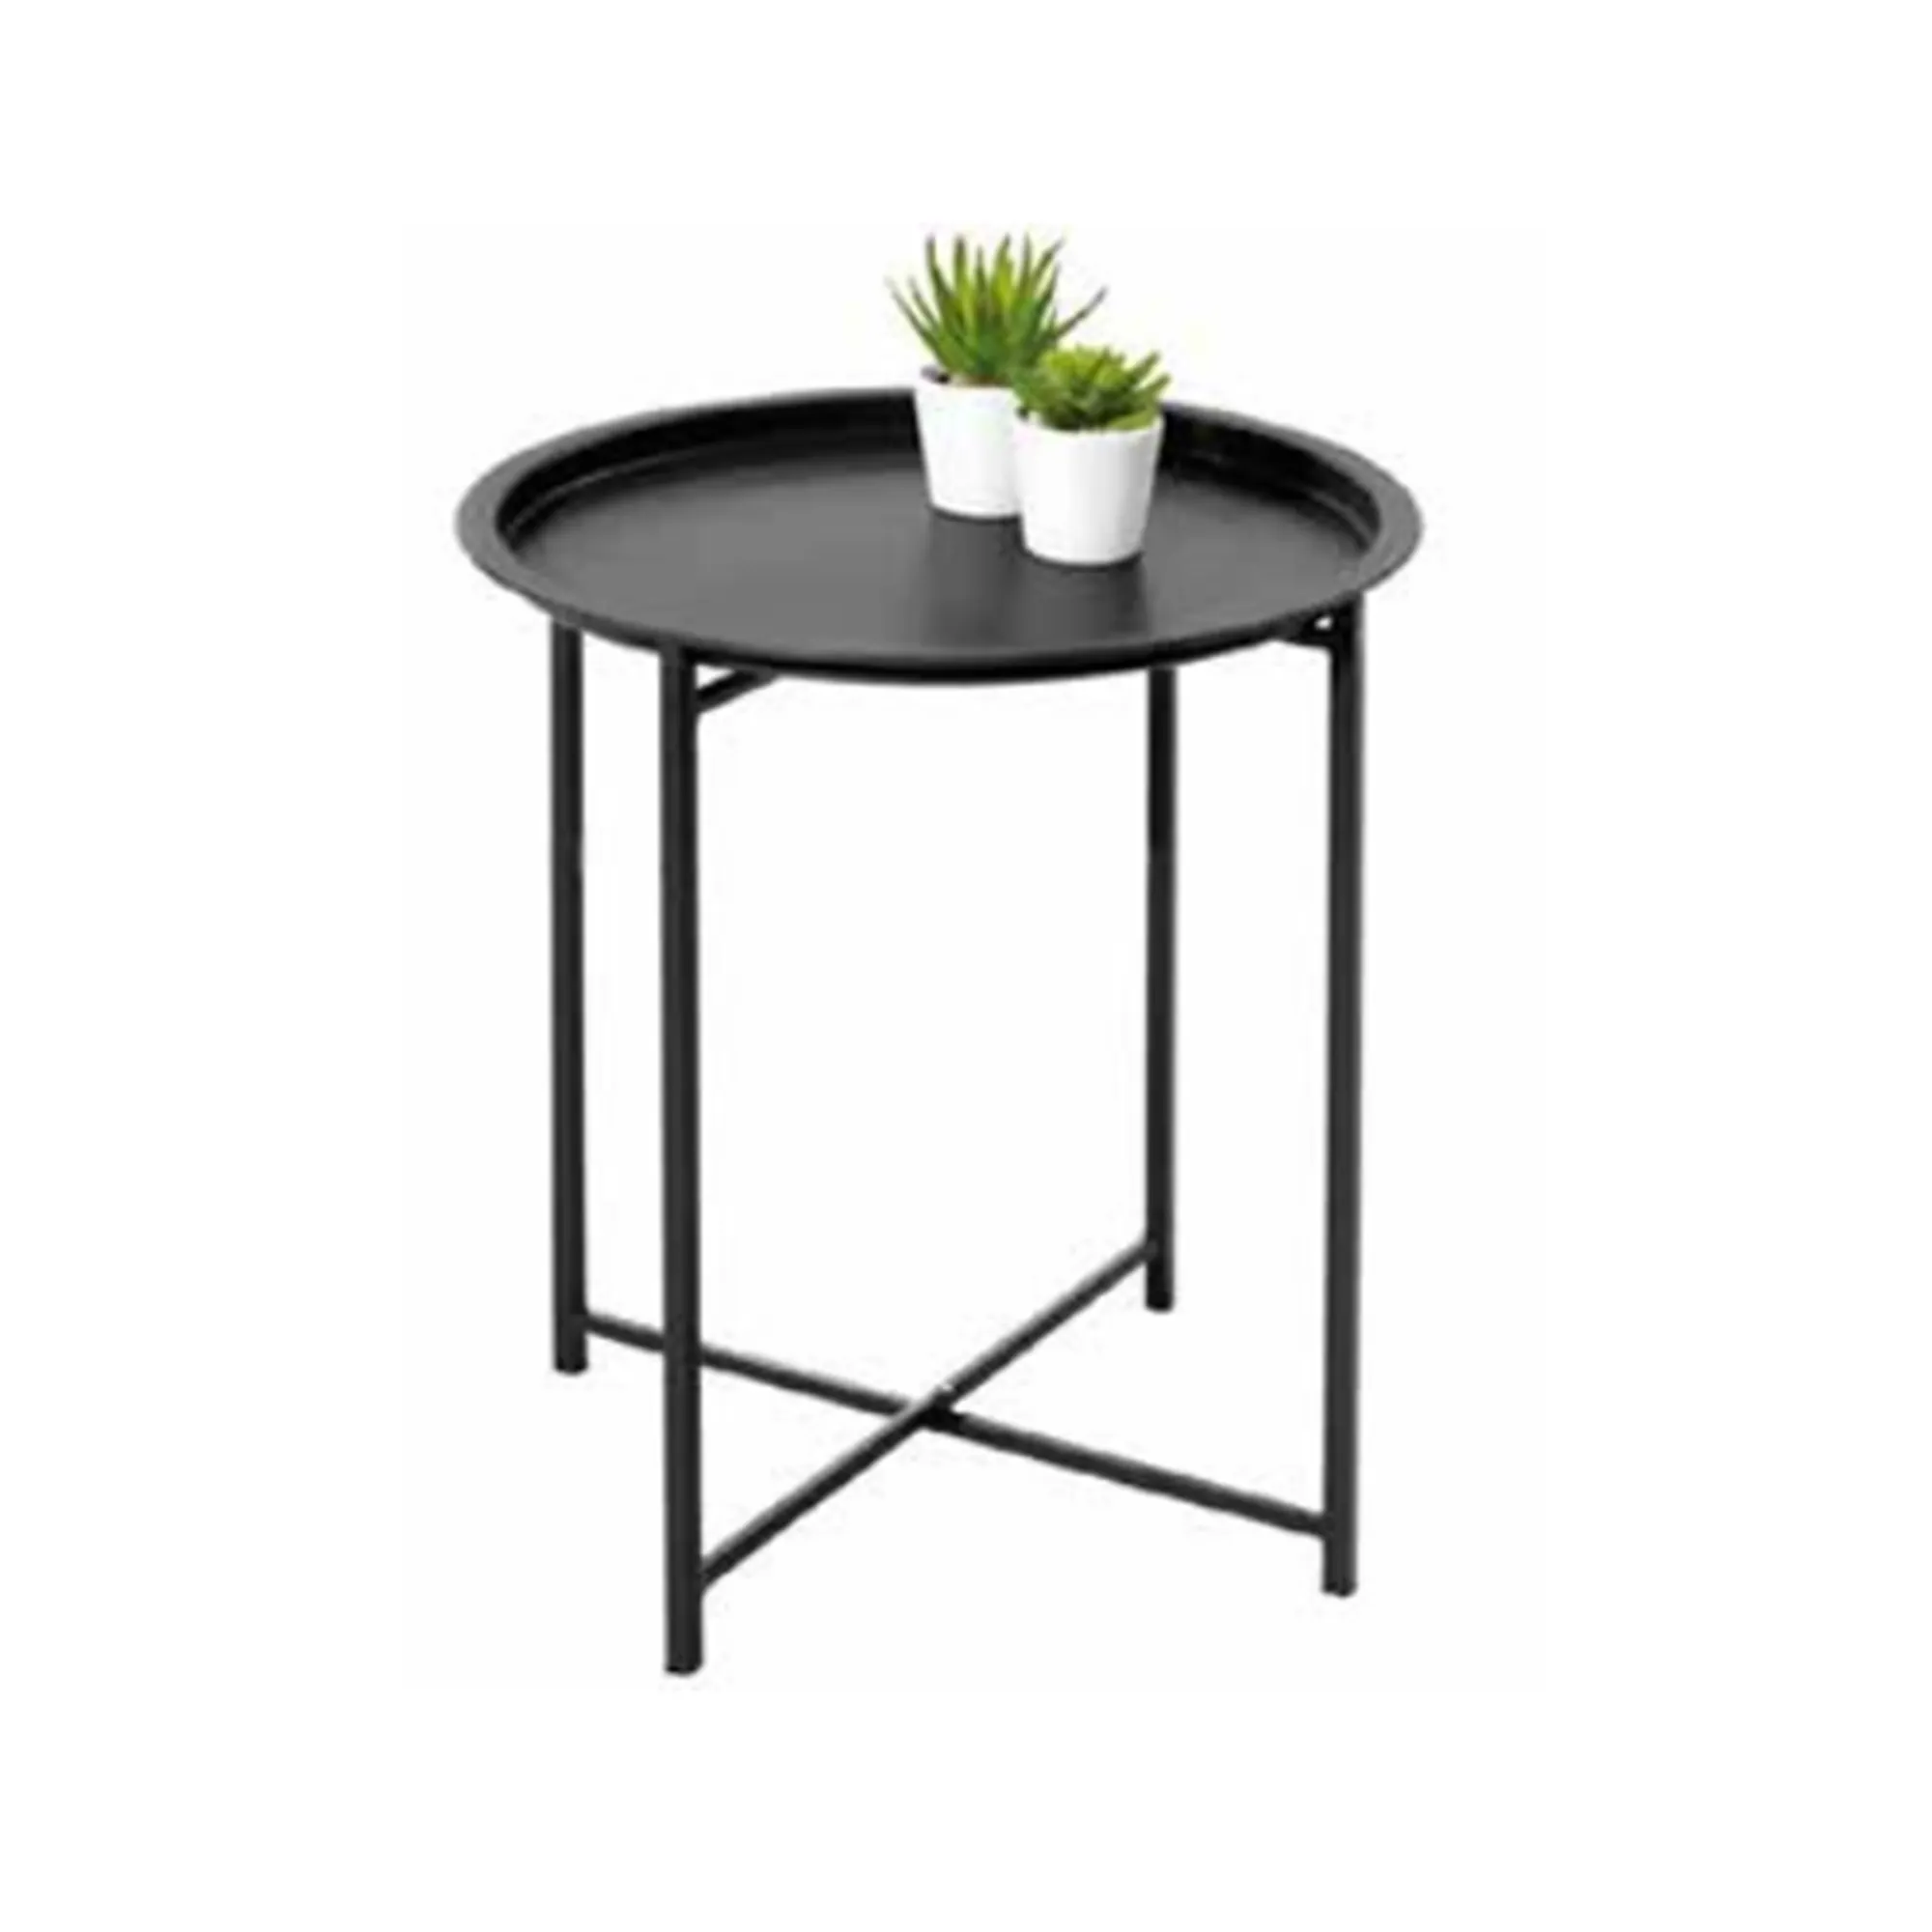 Living Room Furniture Tray Small Round Table Modern Metal Black Folding Round Coffee Table Side Table